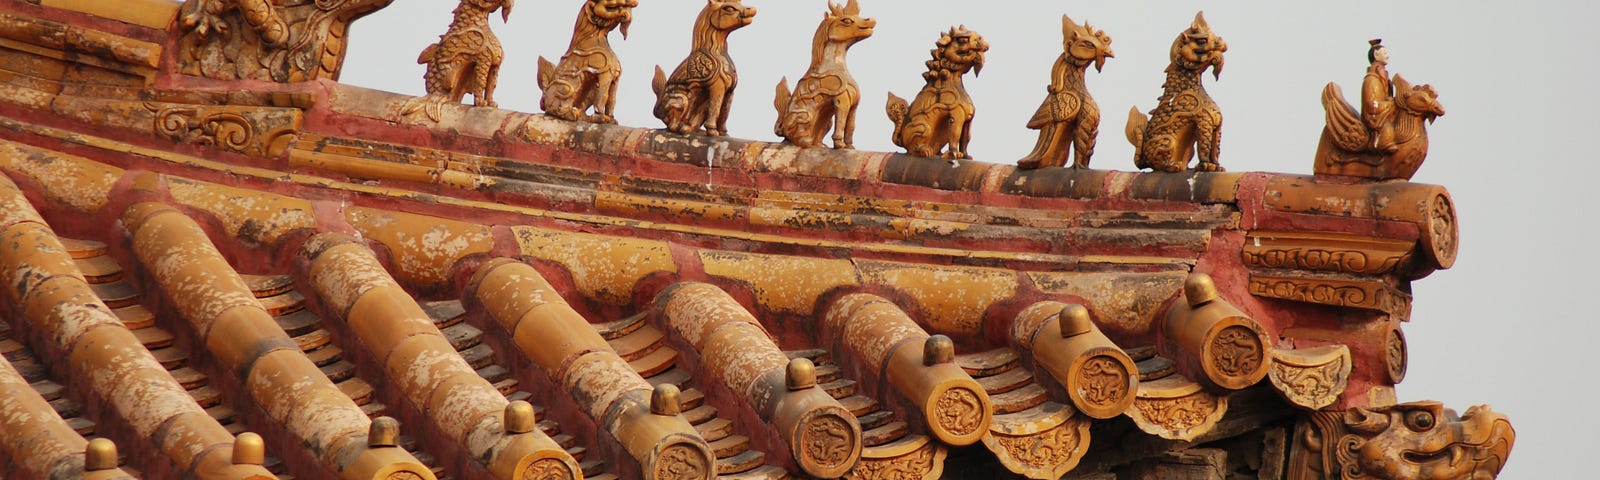 An ornate rooftop carving